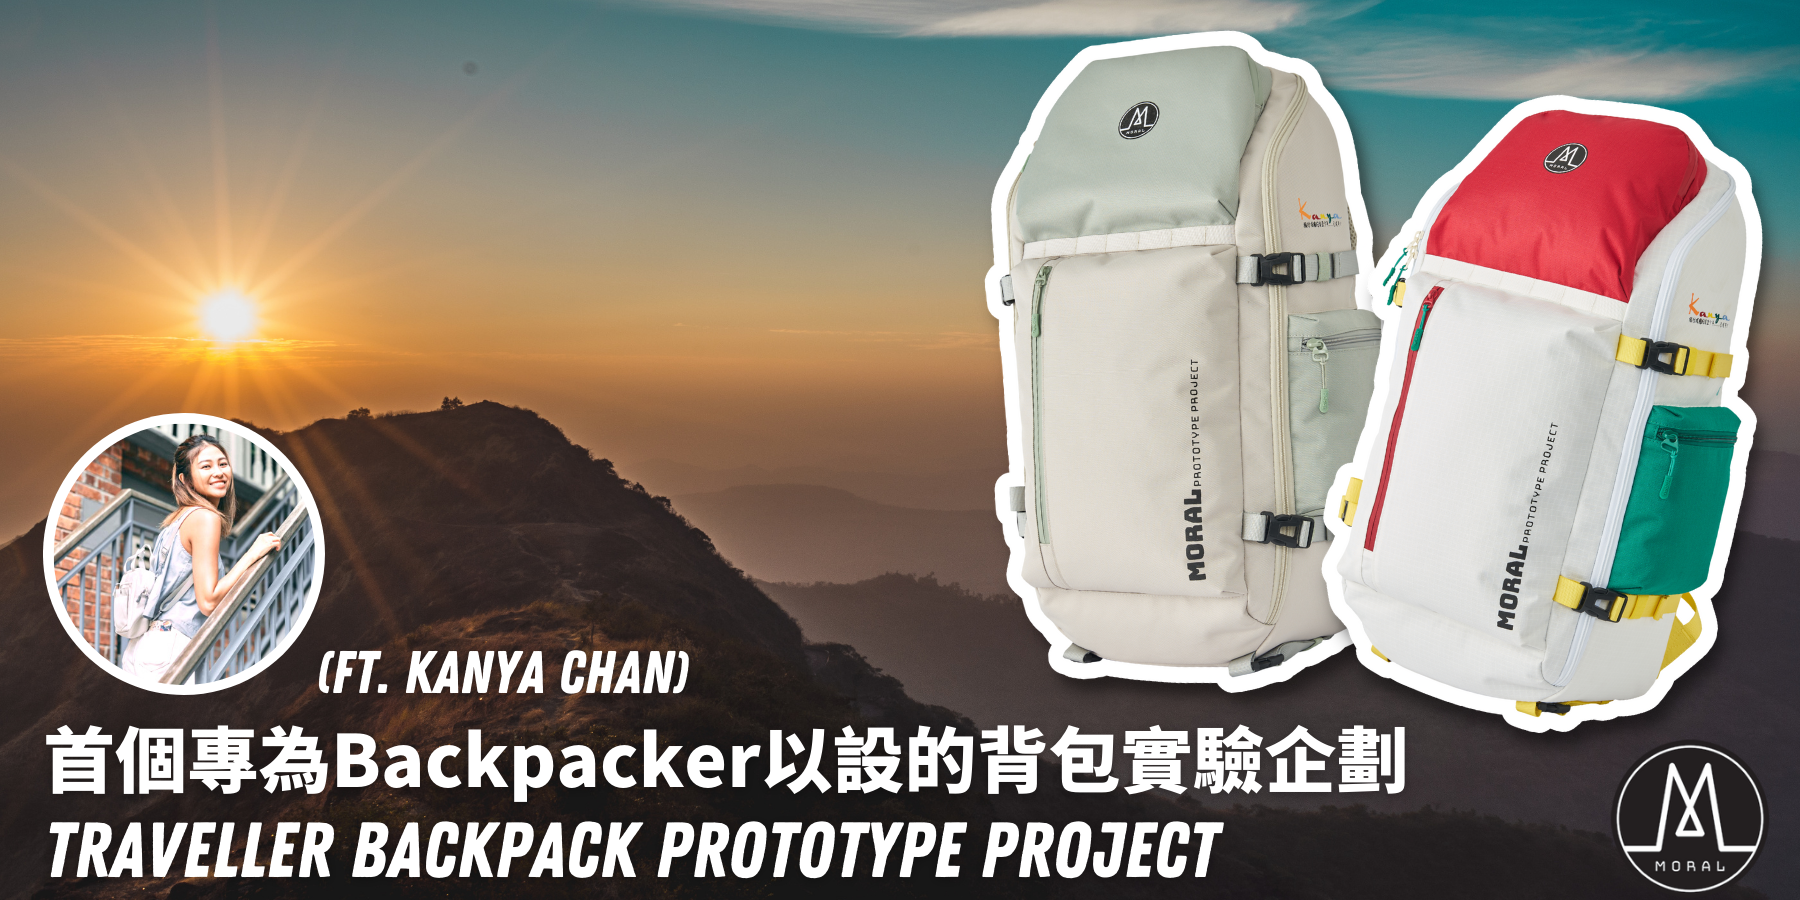 The first backpack experiment project designed specifically with backpackers in mind